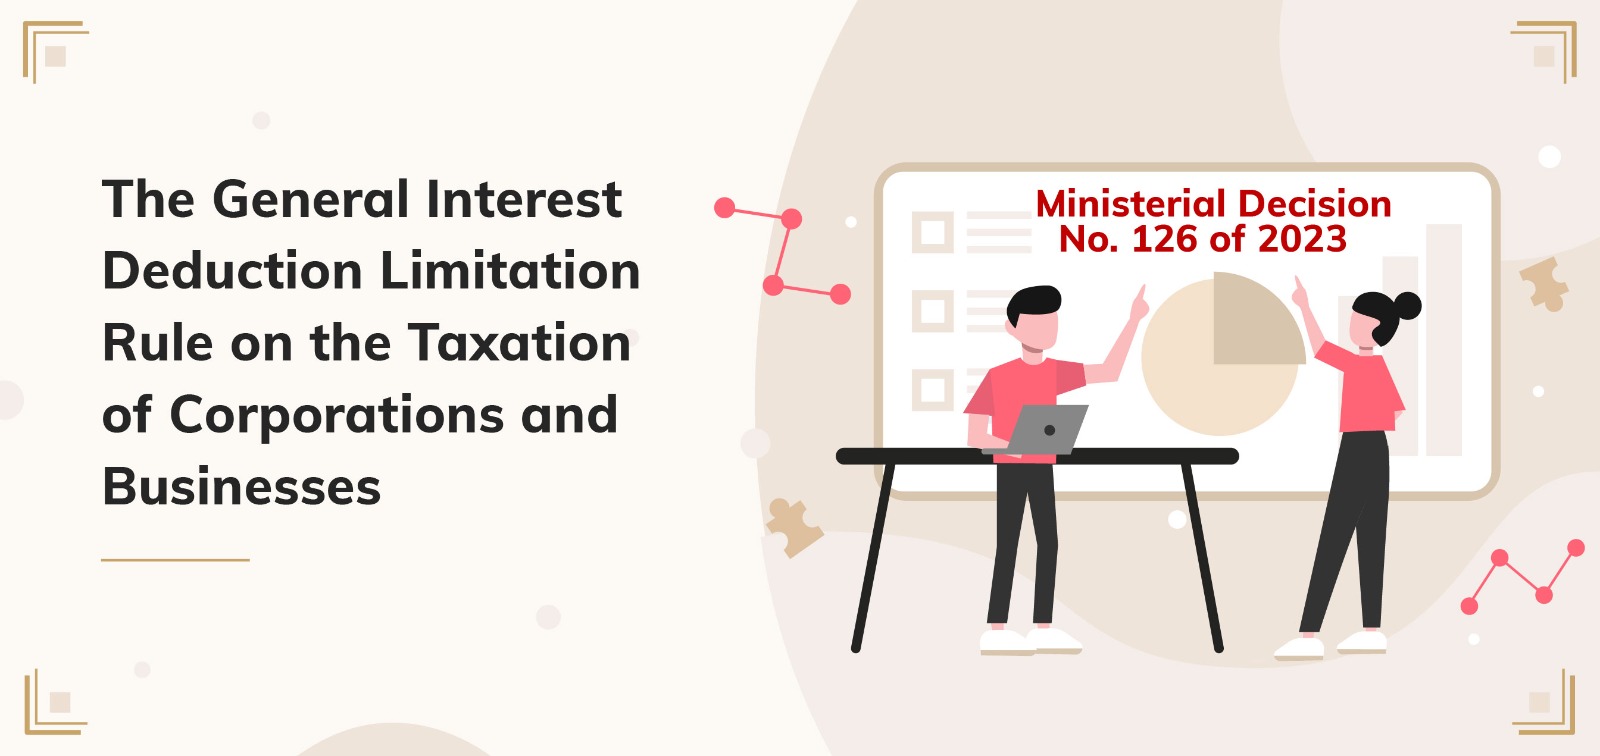 The General Interest Deduction Limitation Rule on the Taxation of Corporations and Businesses